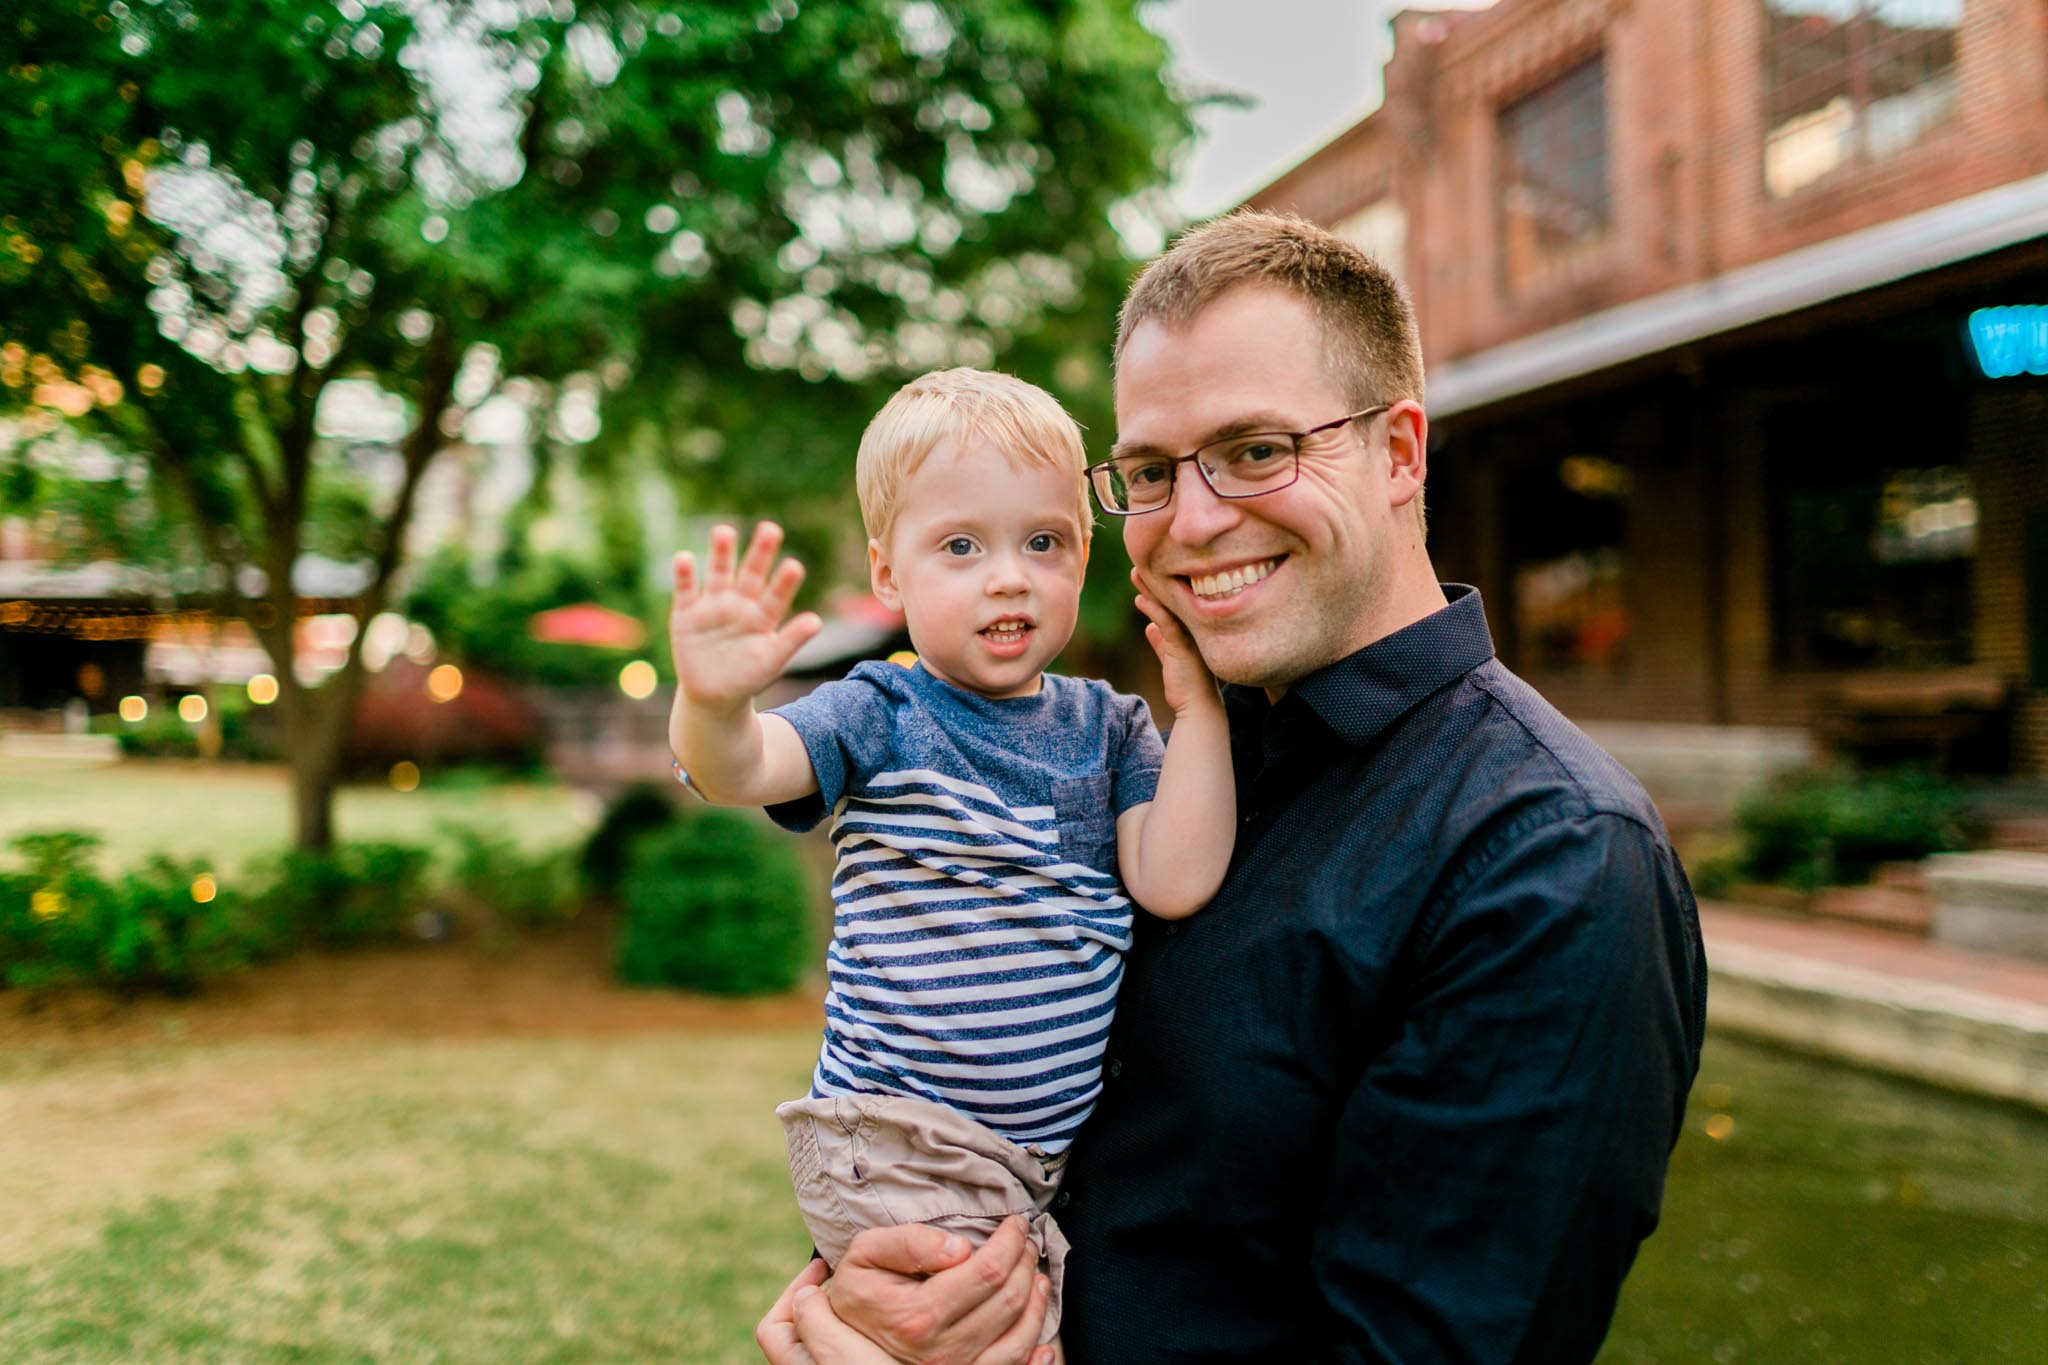 Durham Photographer | By G. Lin Photography | Father holding son